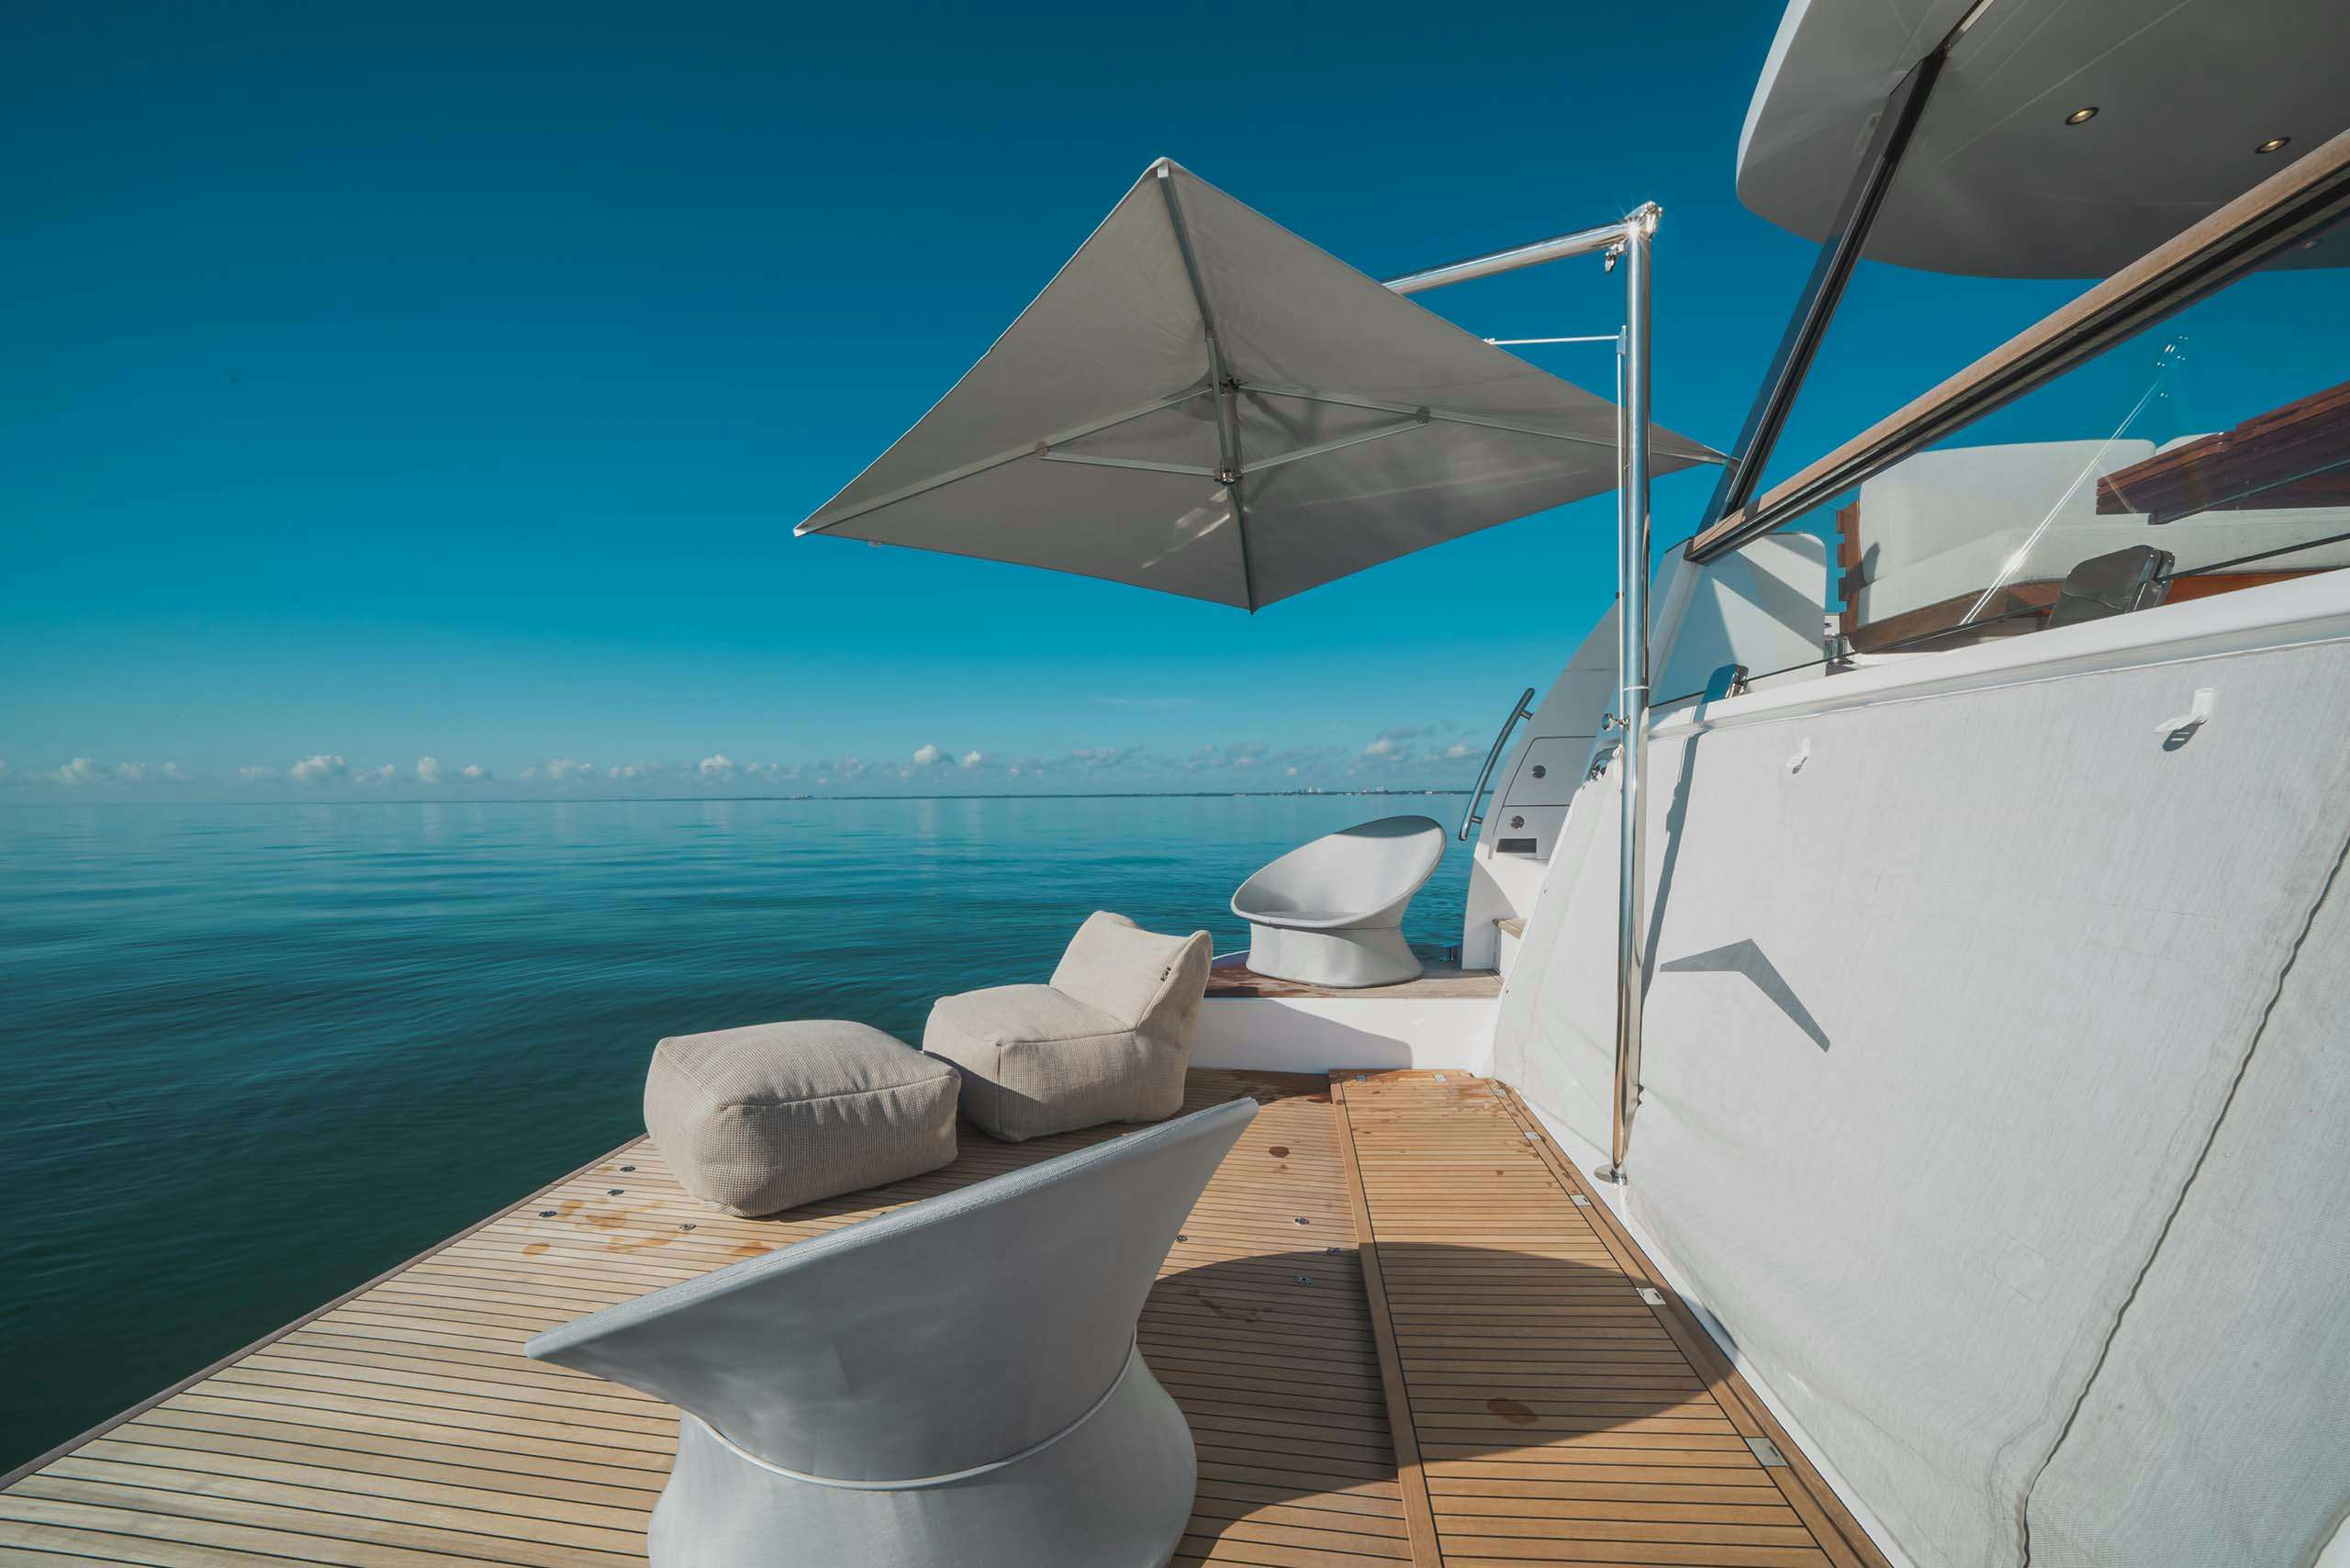 Charter yacht's swimming platform with furniture and umbrella